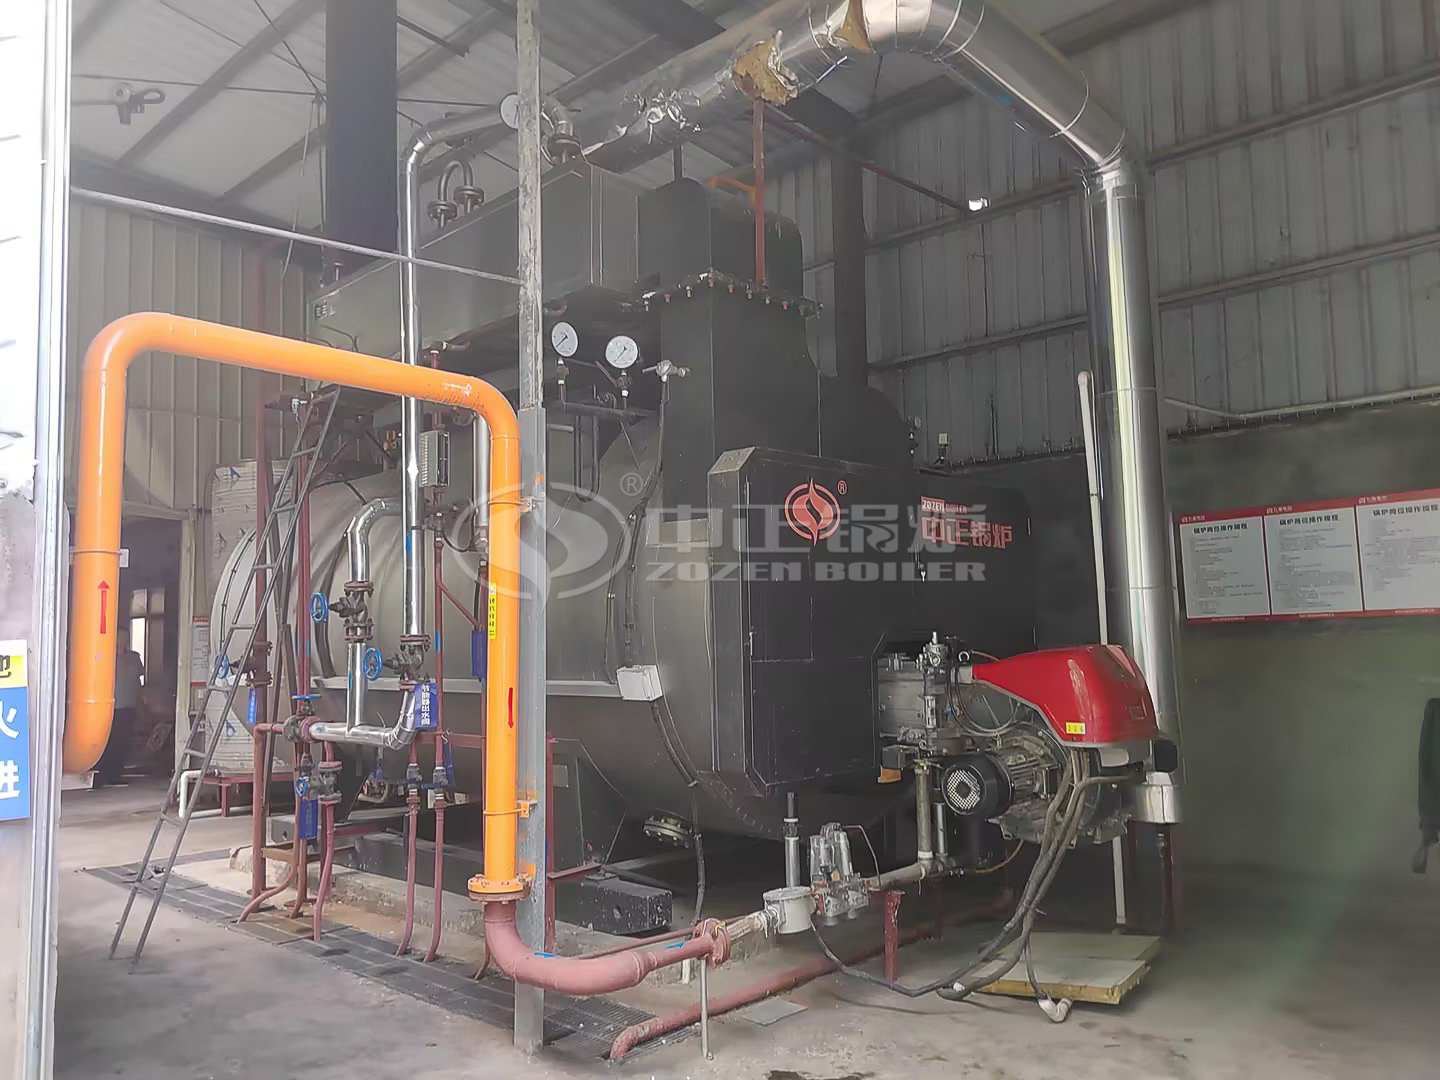 The Importance of Feed Mill Steam Boiler and ZOZEN’s Solutions